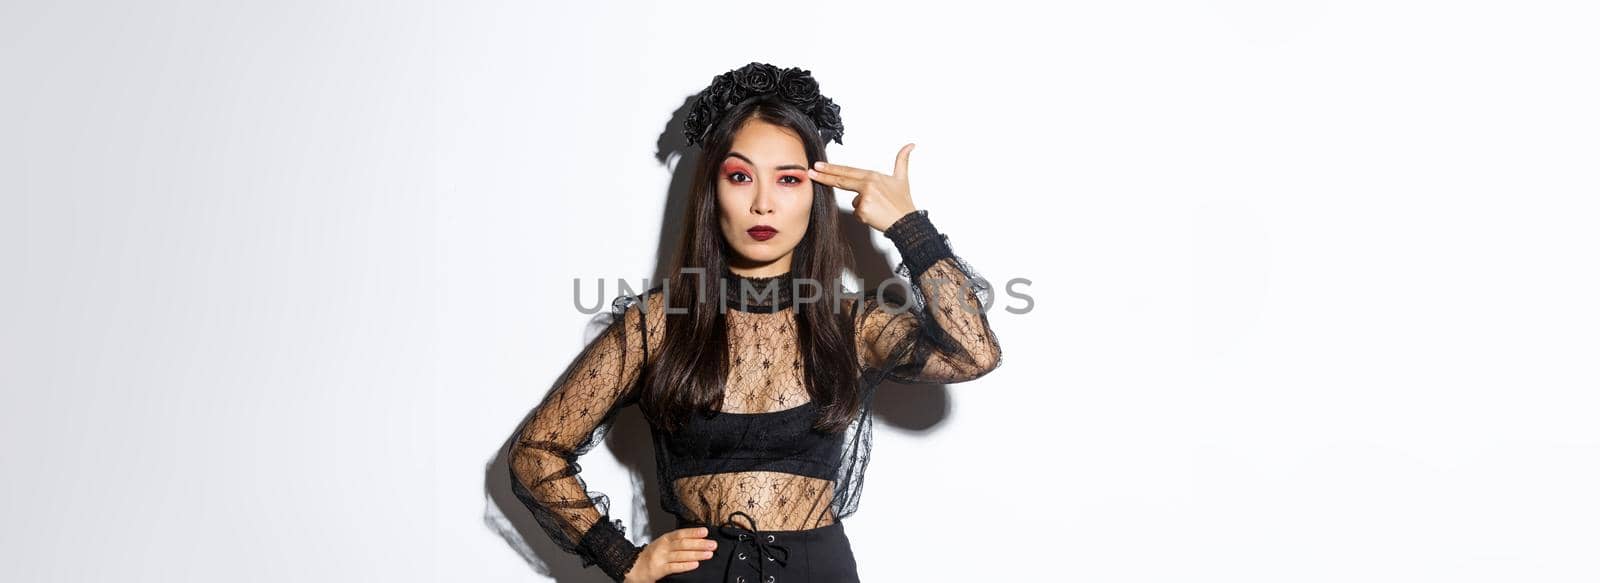 Annoyed young woman looking disappointed while making finger gun gesture over head, wearing halloween costume, standing over white background.